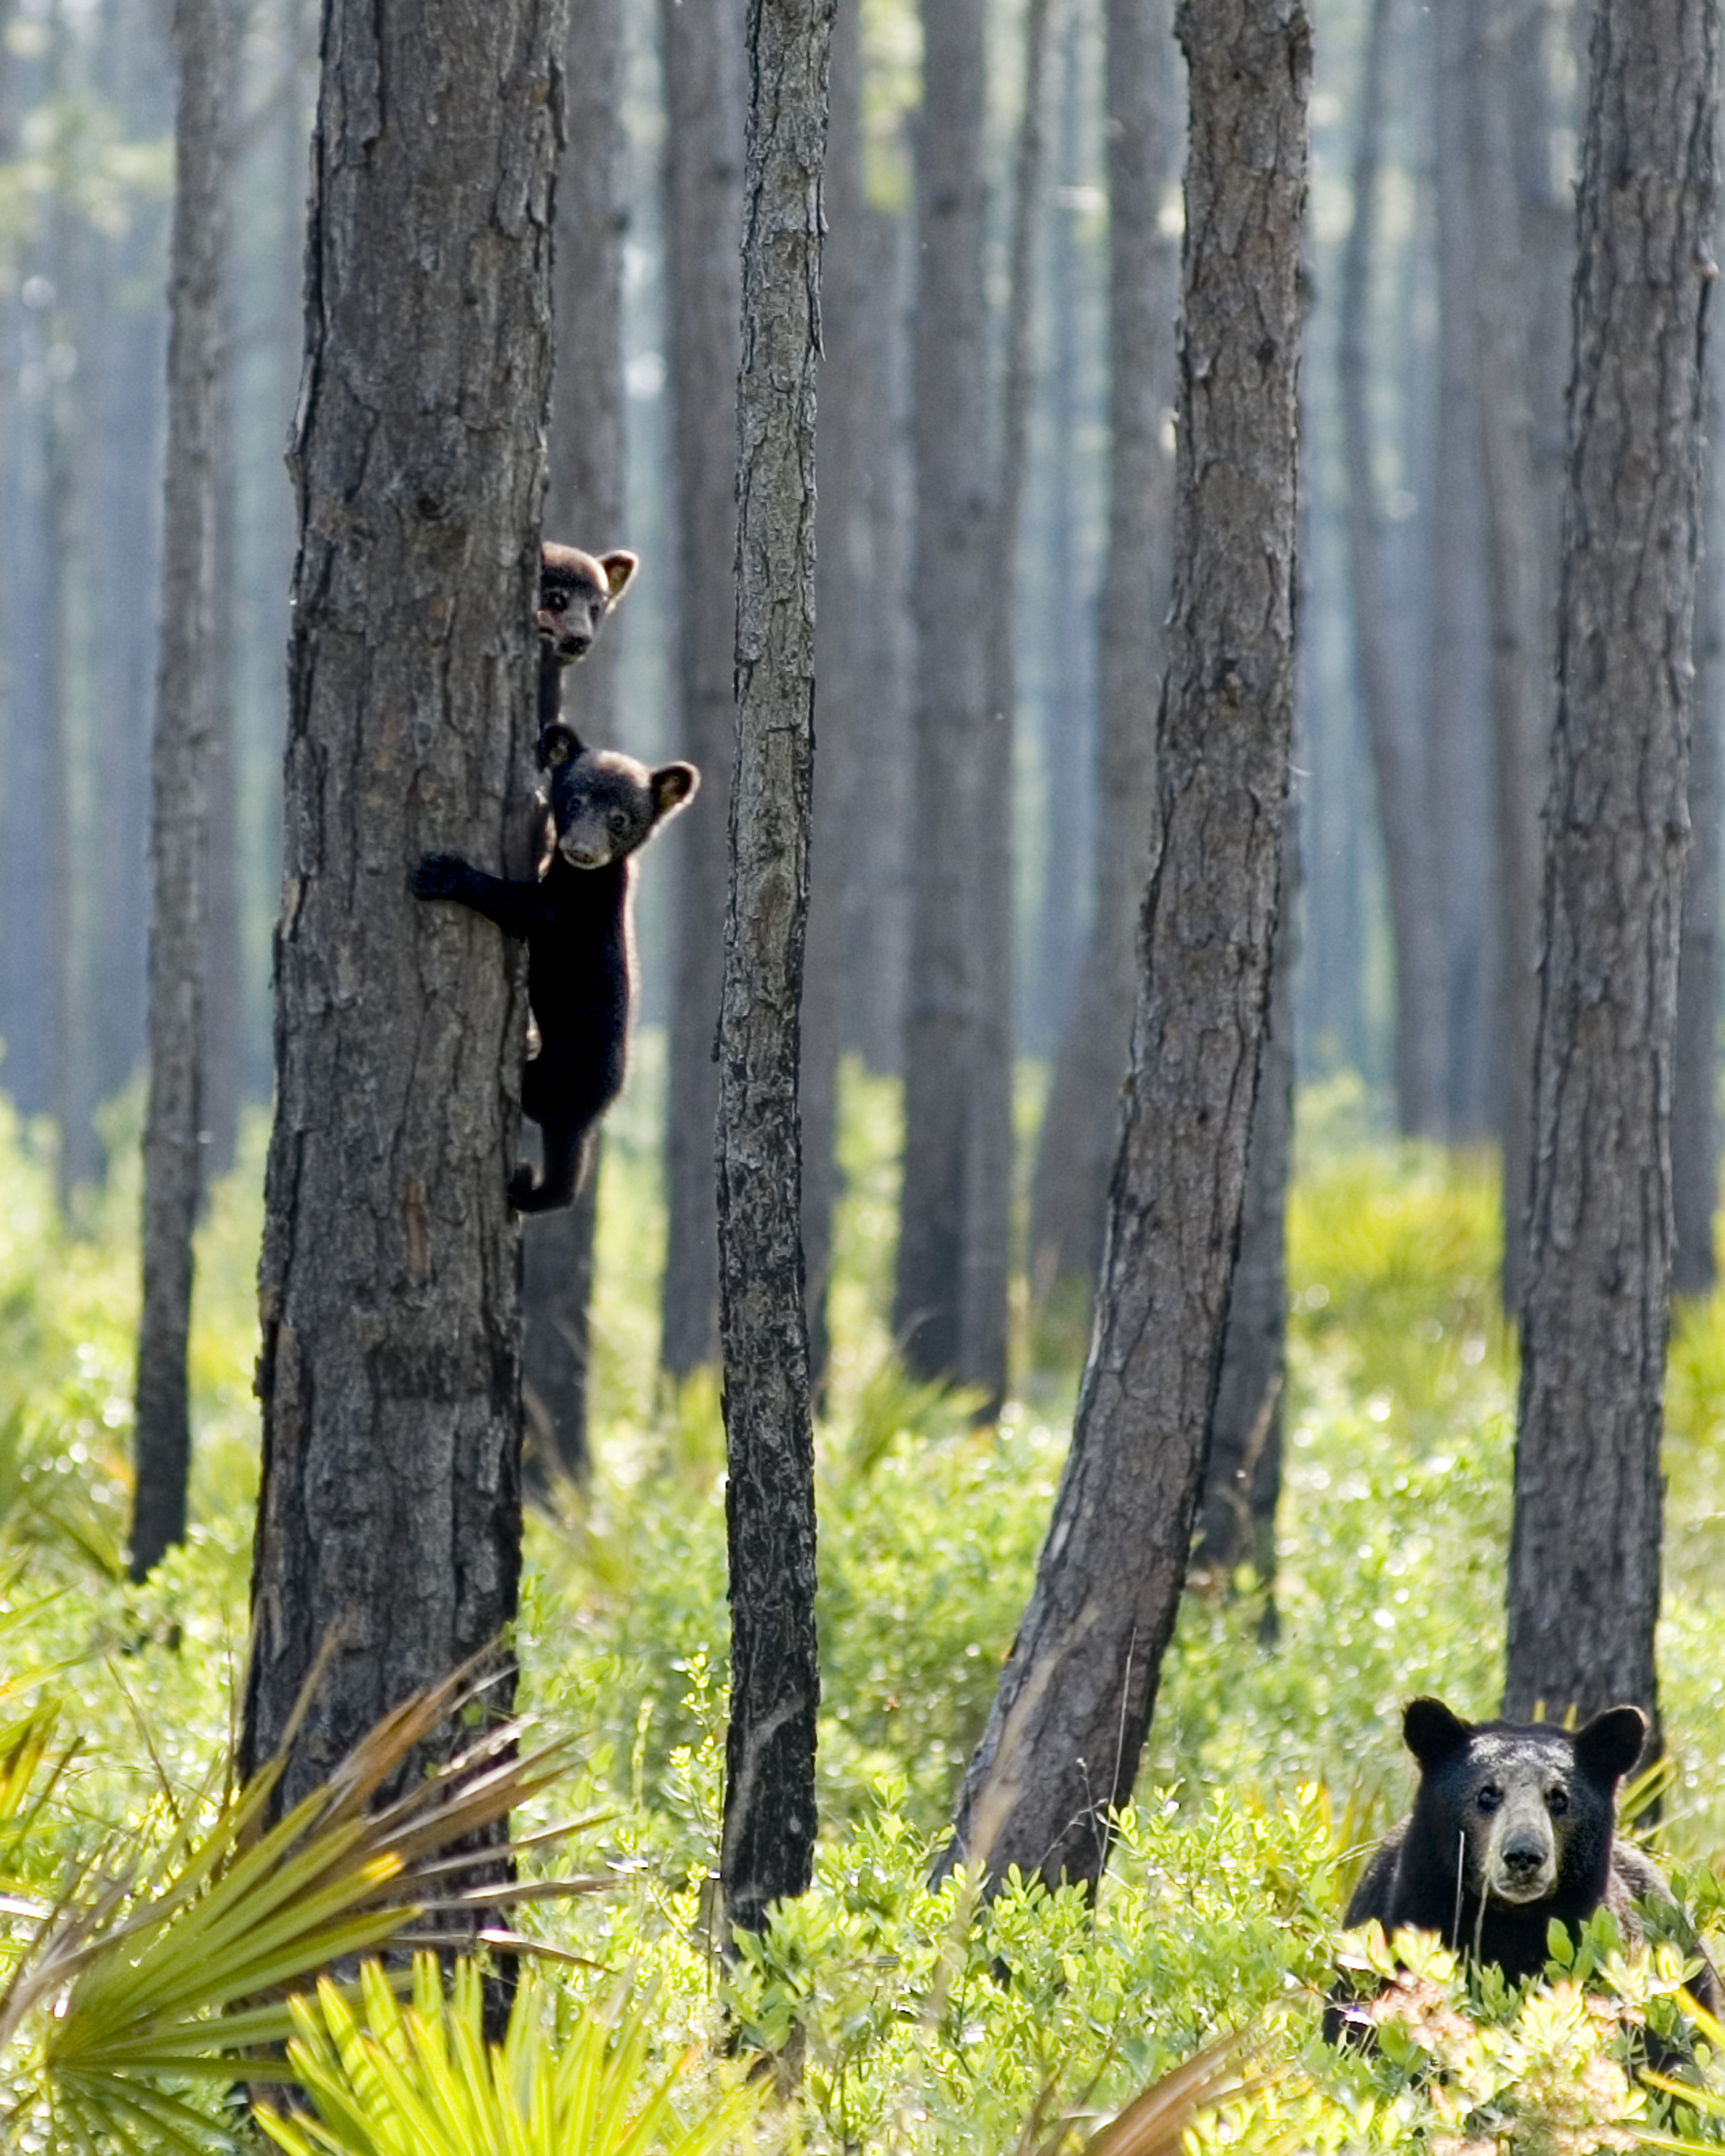 A mother black bear on the ground with cubs in a tree.